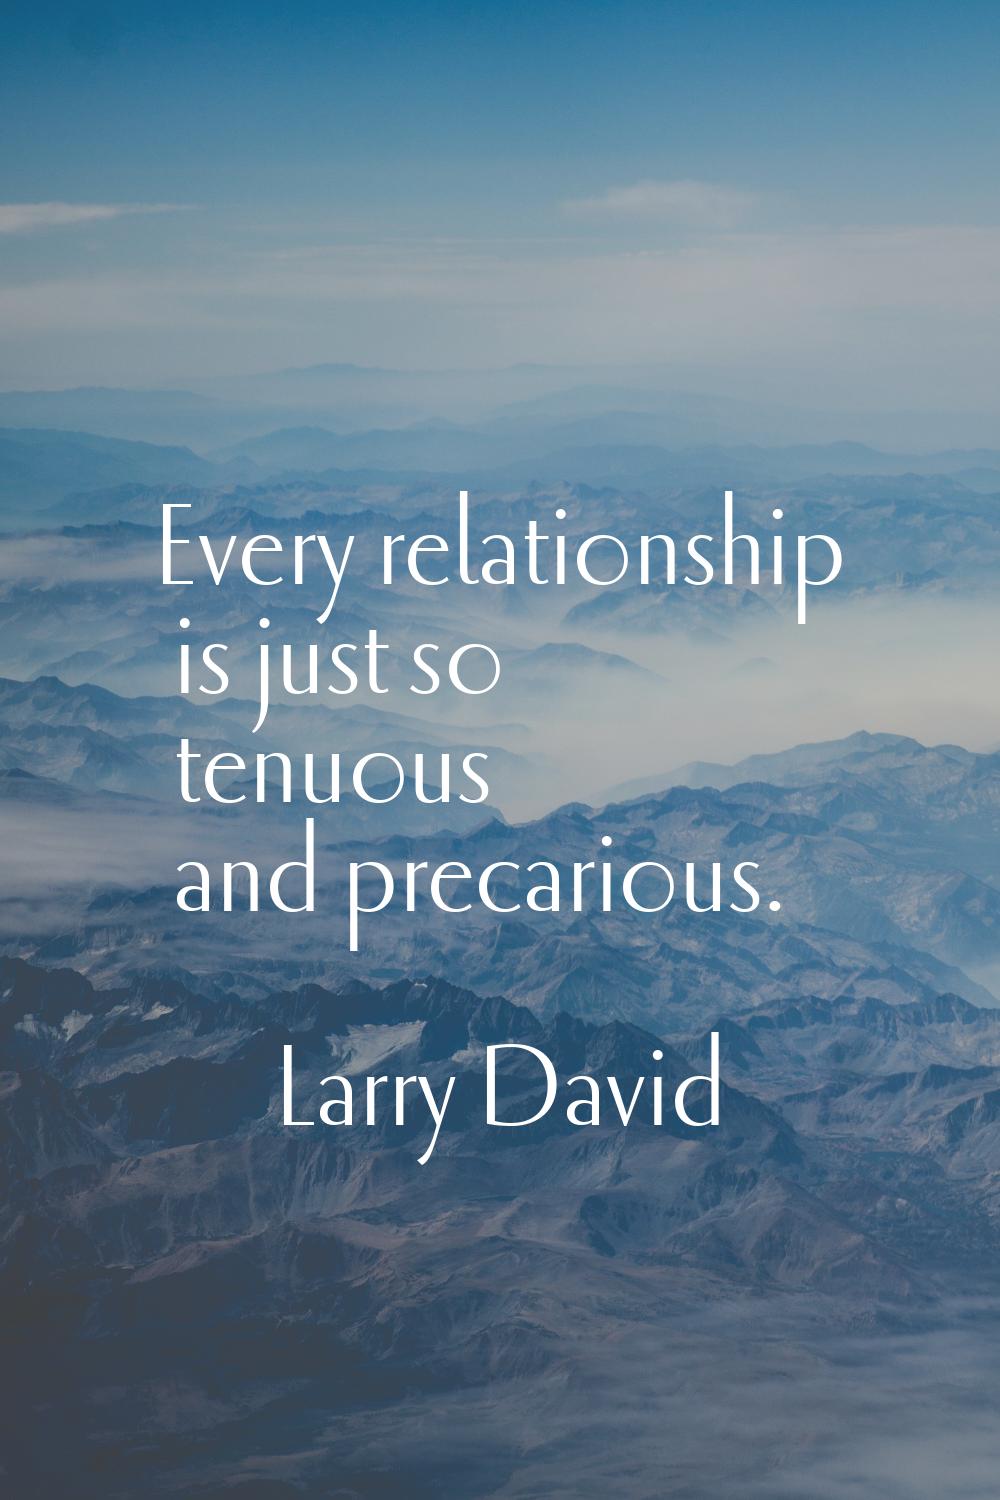 Every relationship is just so tenuous and precarious.